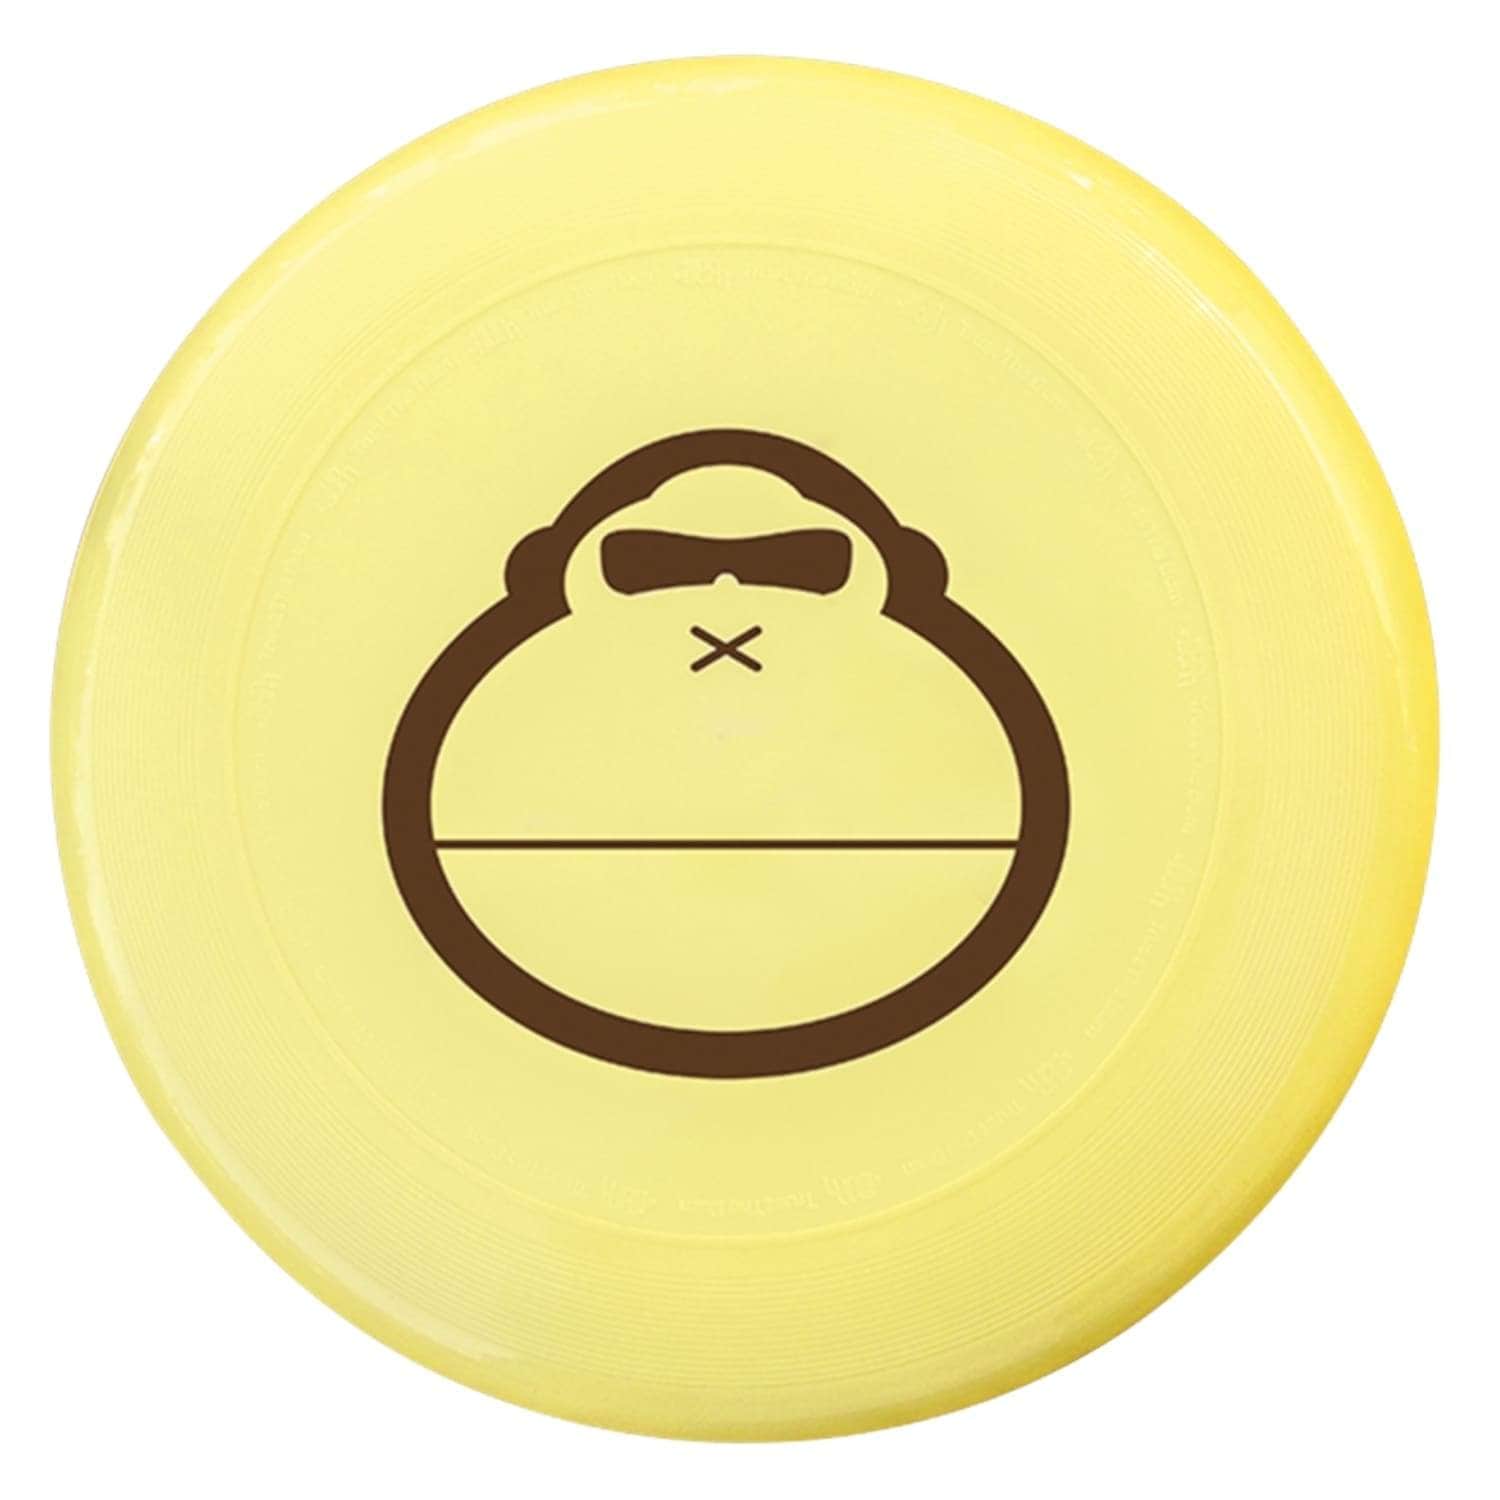 Sun Bum Beach Flyer Ultimate Frisbee Flying Disc - Yellow - Gifts for Surfers by Sun Bum 10.75 inch / 175 grams